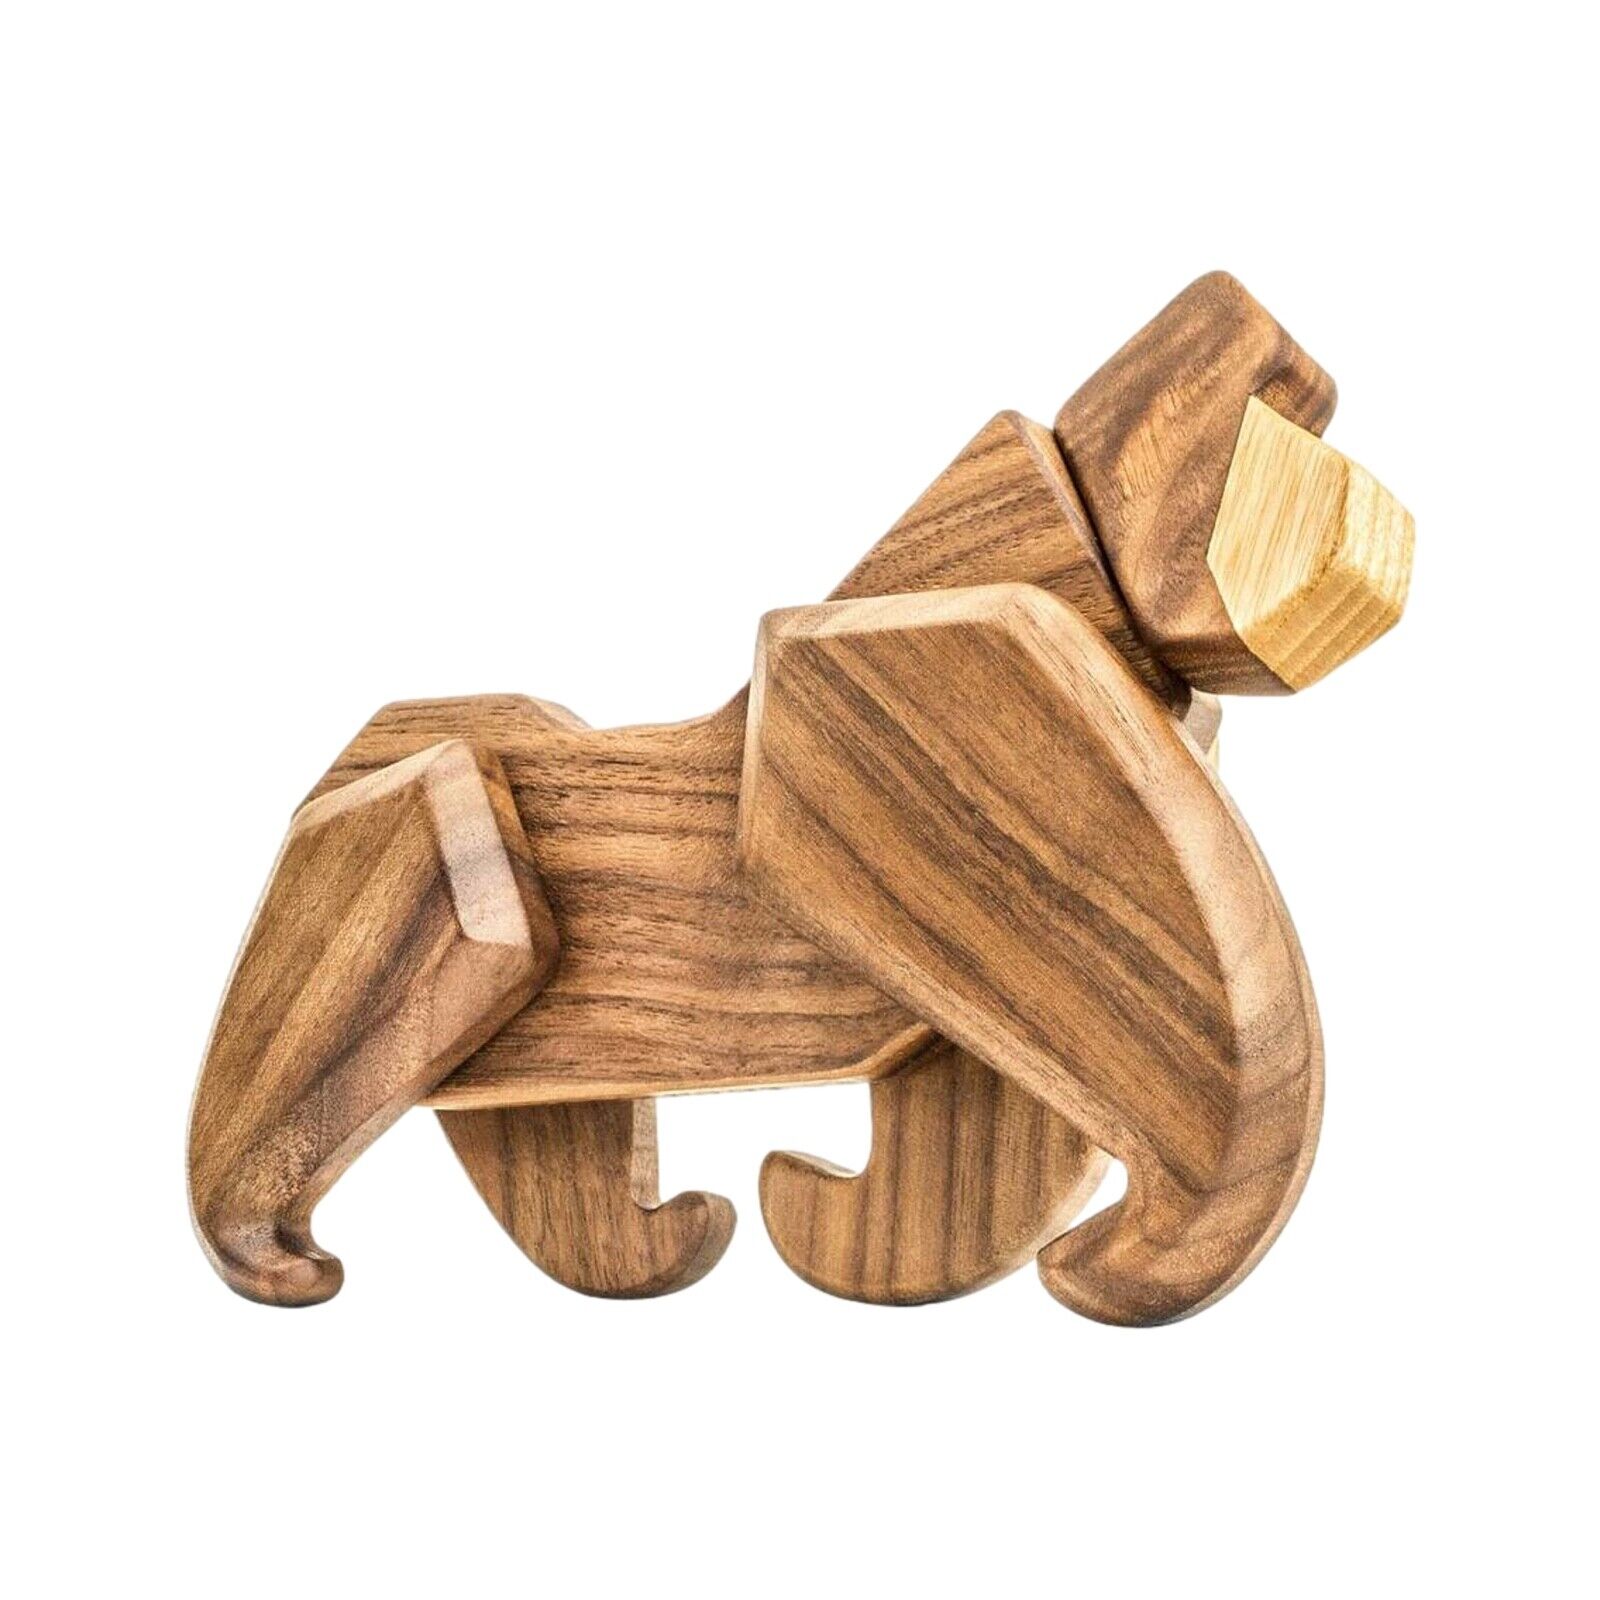 The Gorilla By Fablewood Wooden Animal Figurine Danish Contemporary Design